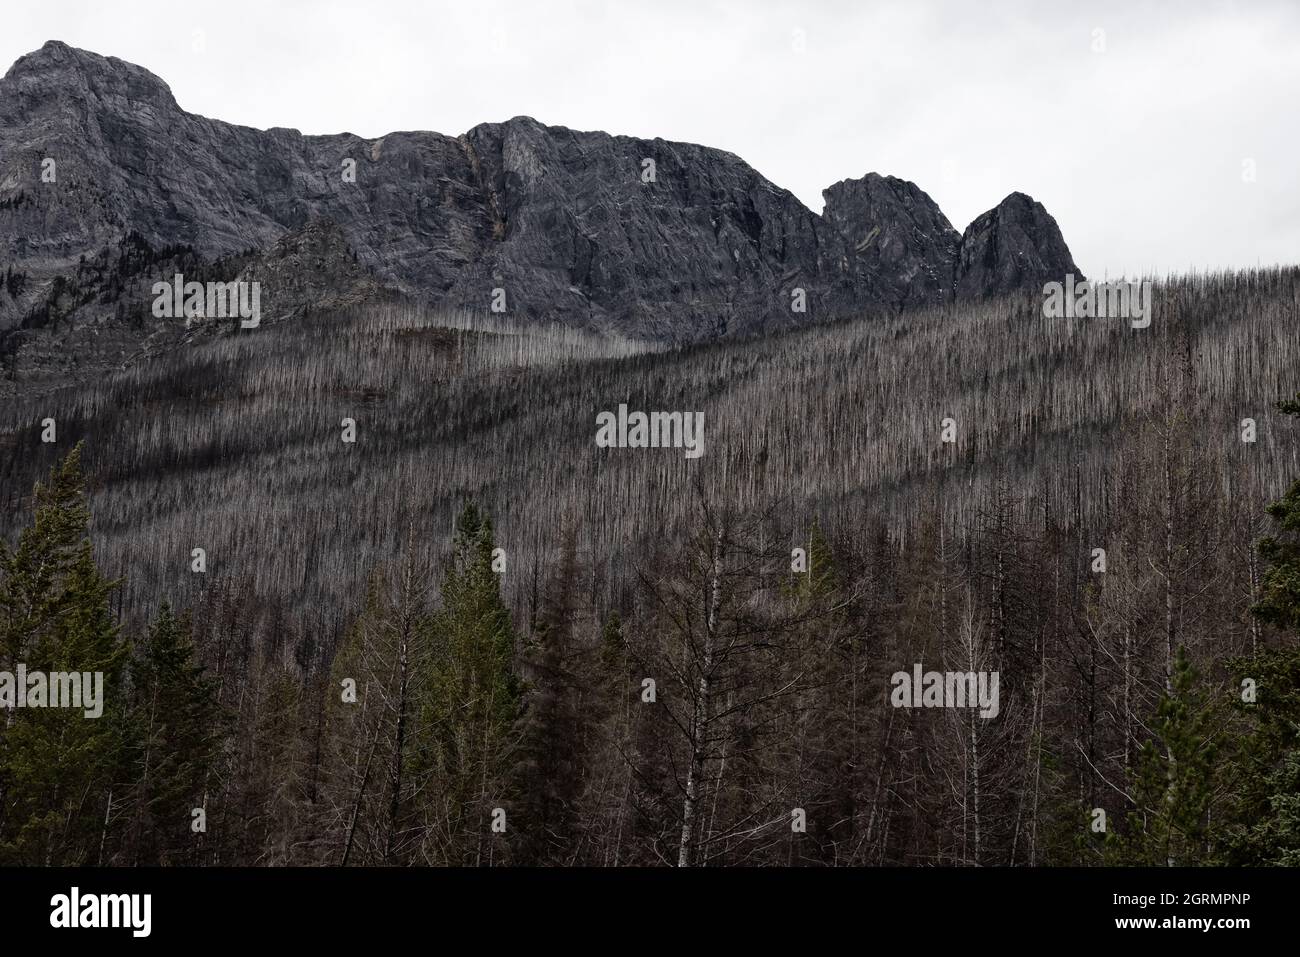 Trees in the Canadian Rocky Mountains Devestated and Burned by the Forest Fire Stock Photo